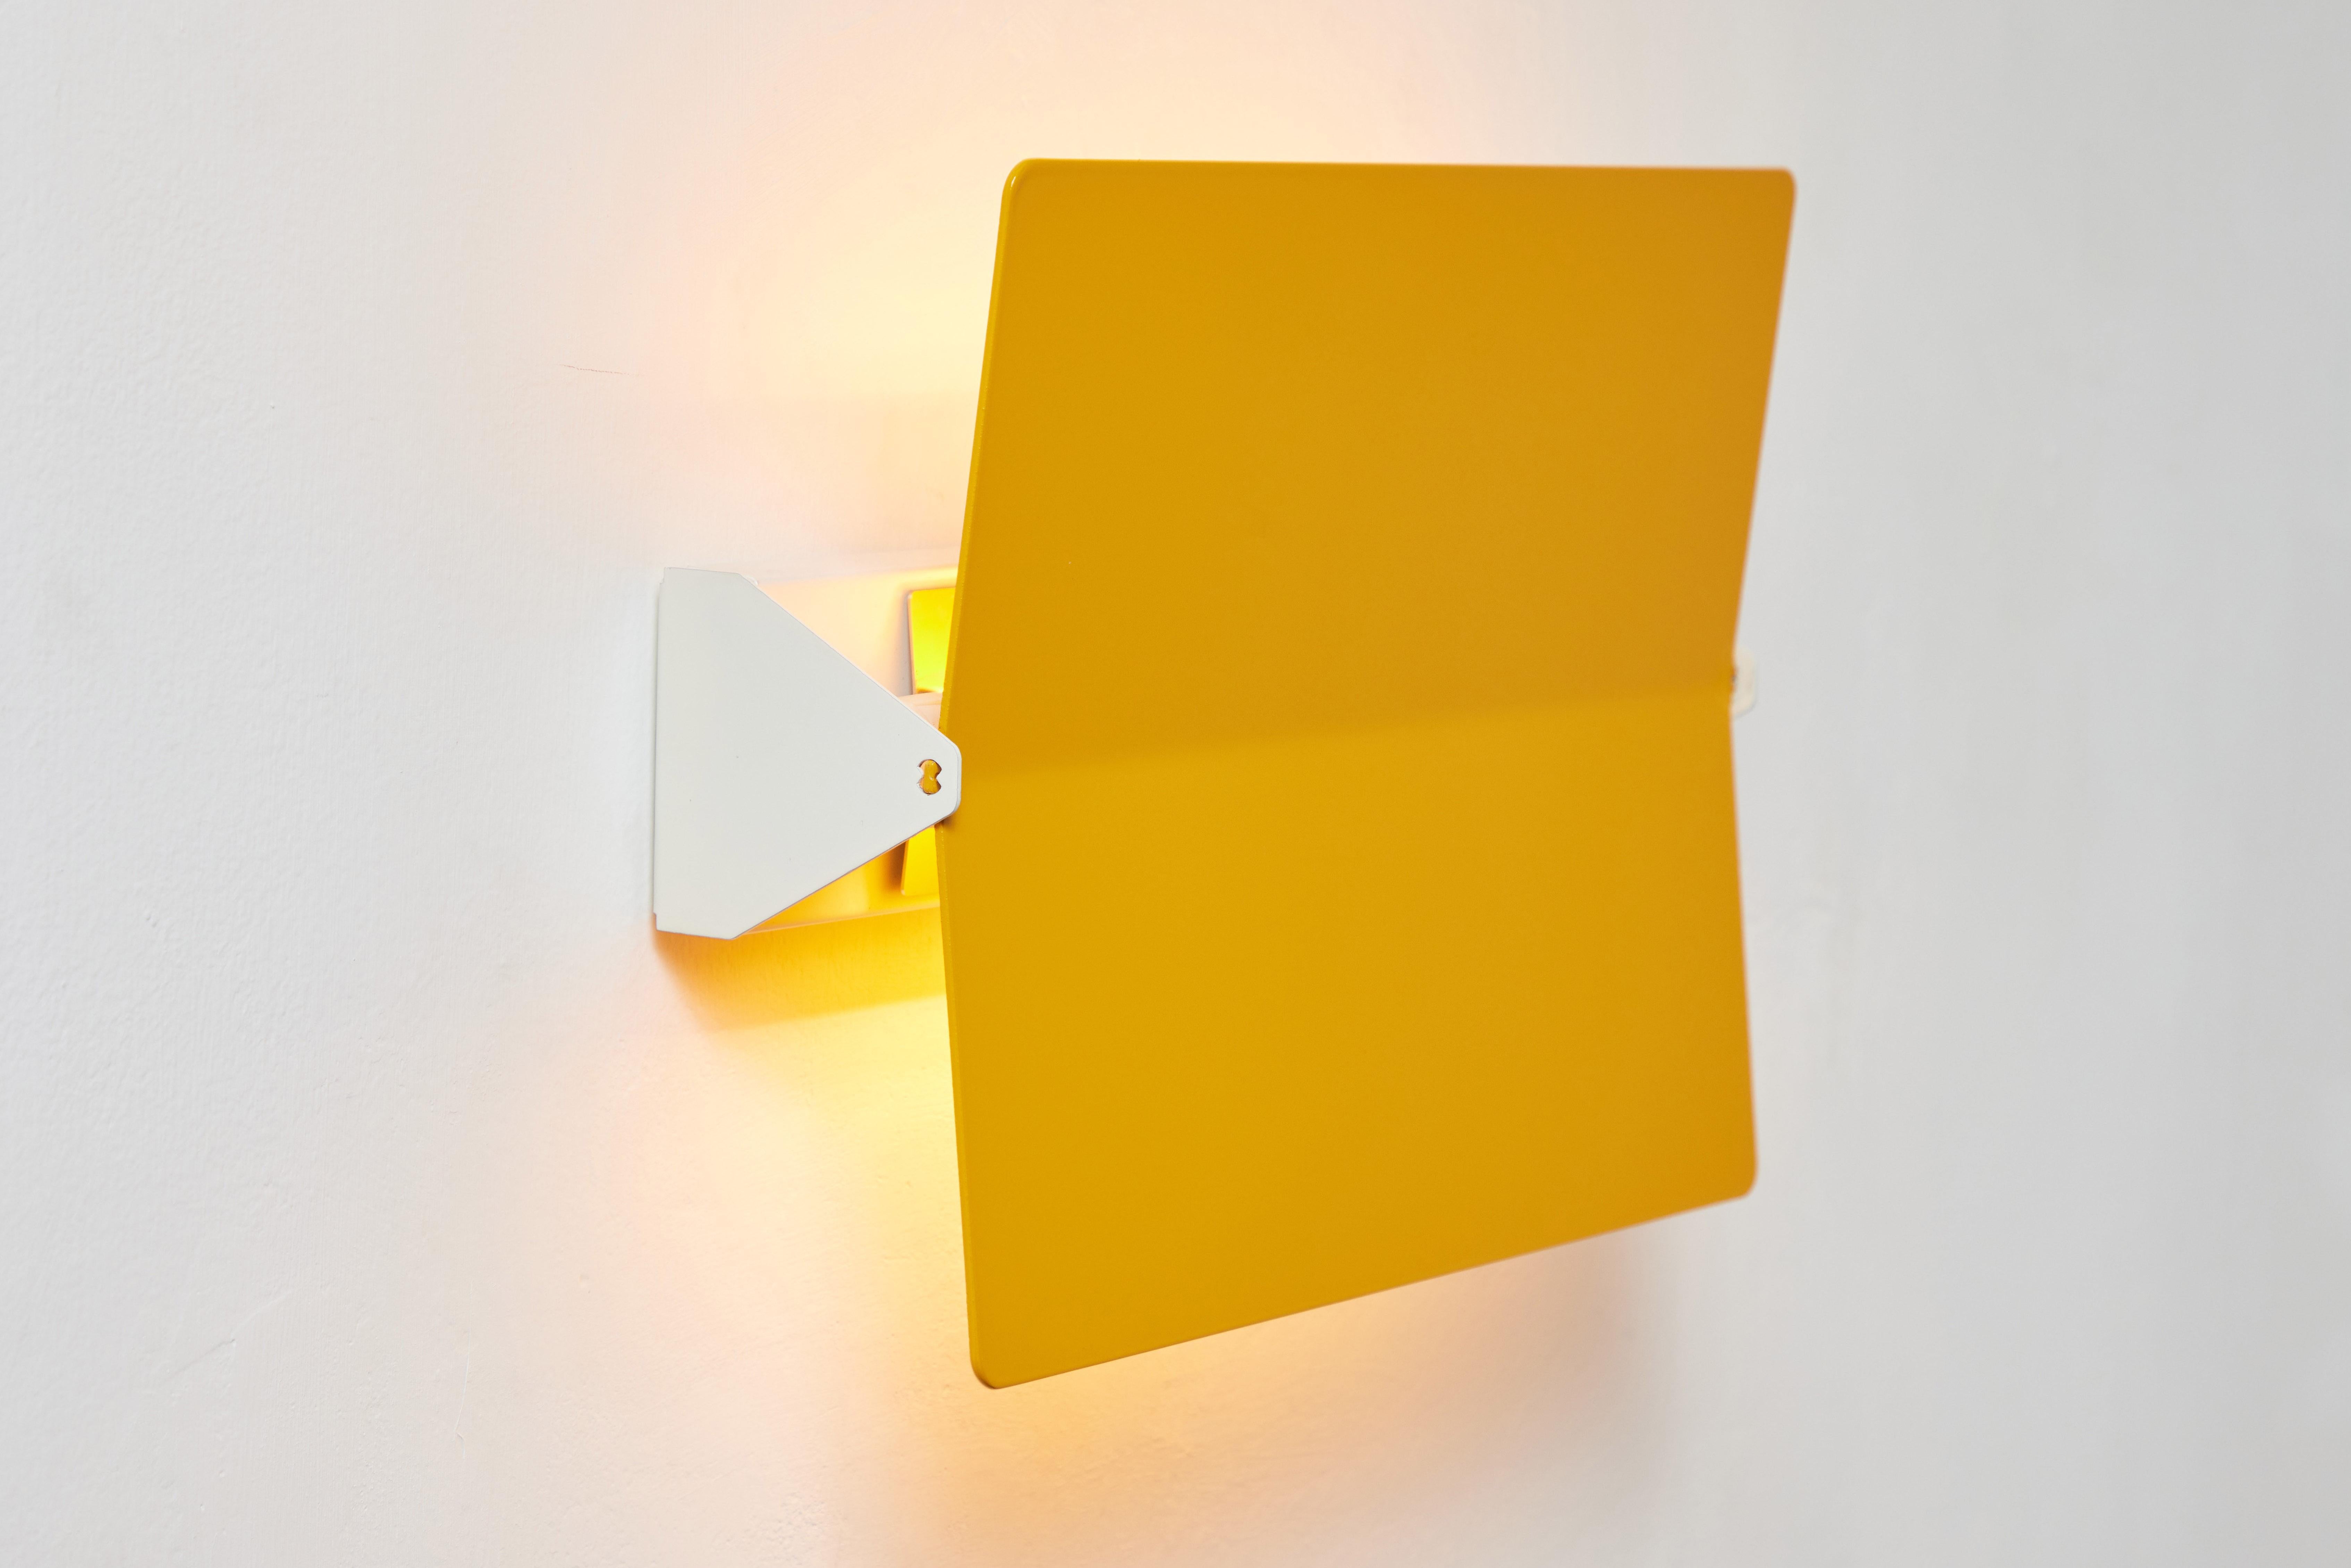 Large Charlotte Perriand 'Applique À Volet Pivotant Plié' wall light in yellow. 

Originally designed in the 1950s as the iconic CP1, these newly produced authorized re-editions are still made in France with the highest level of integrity and